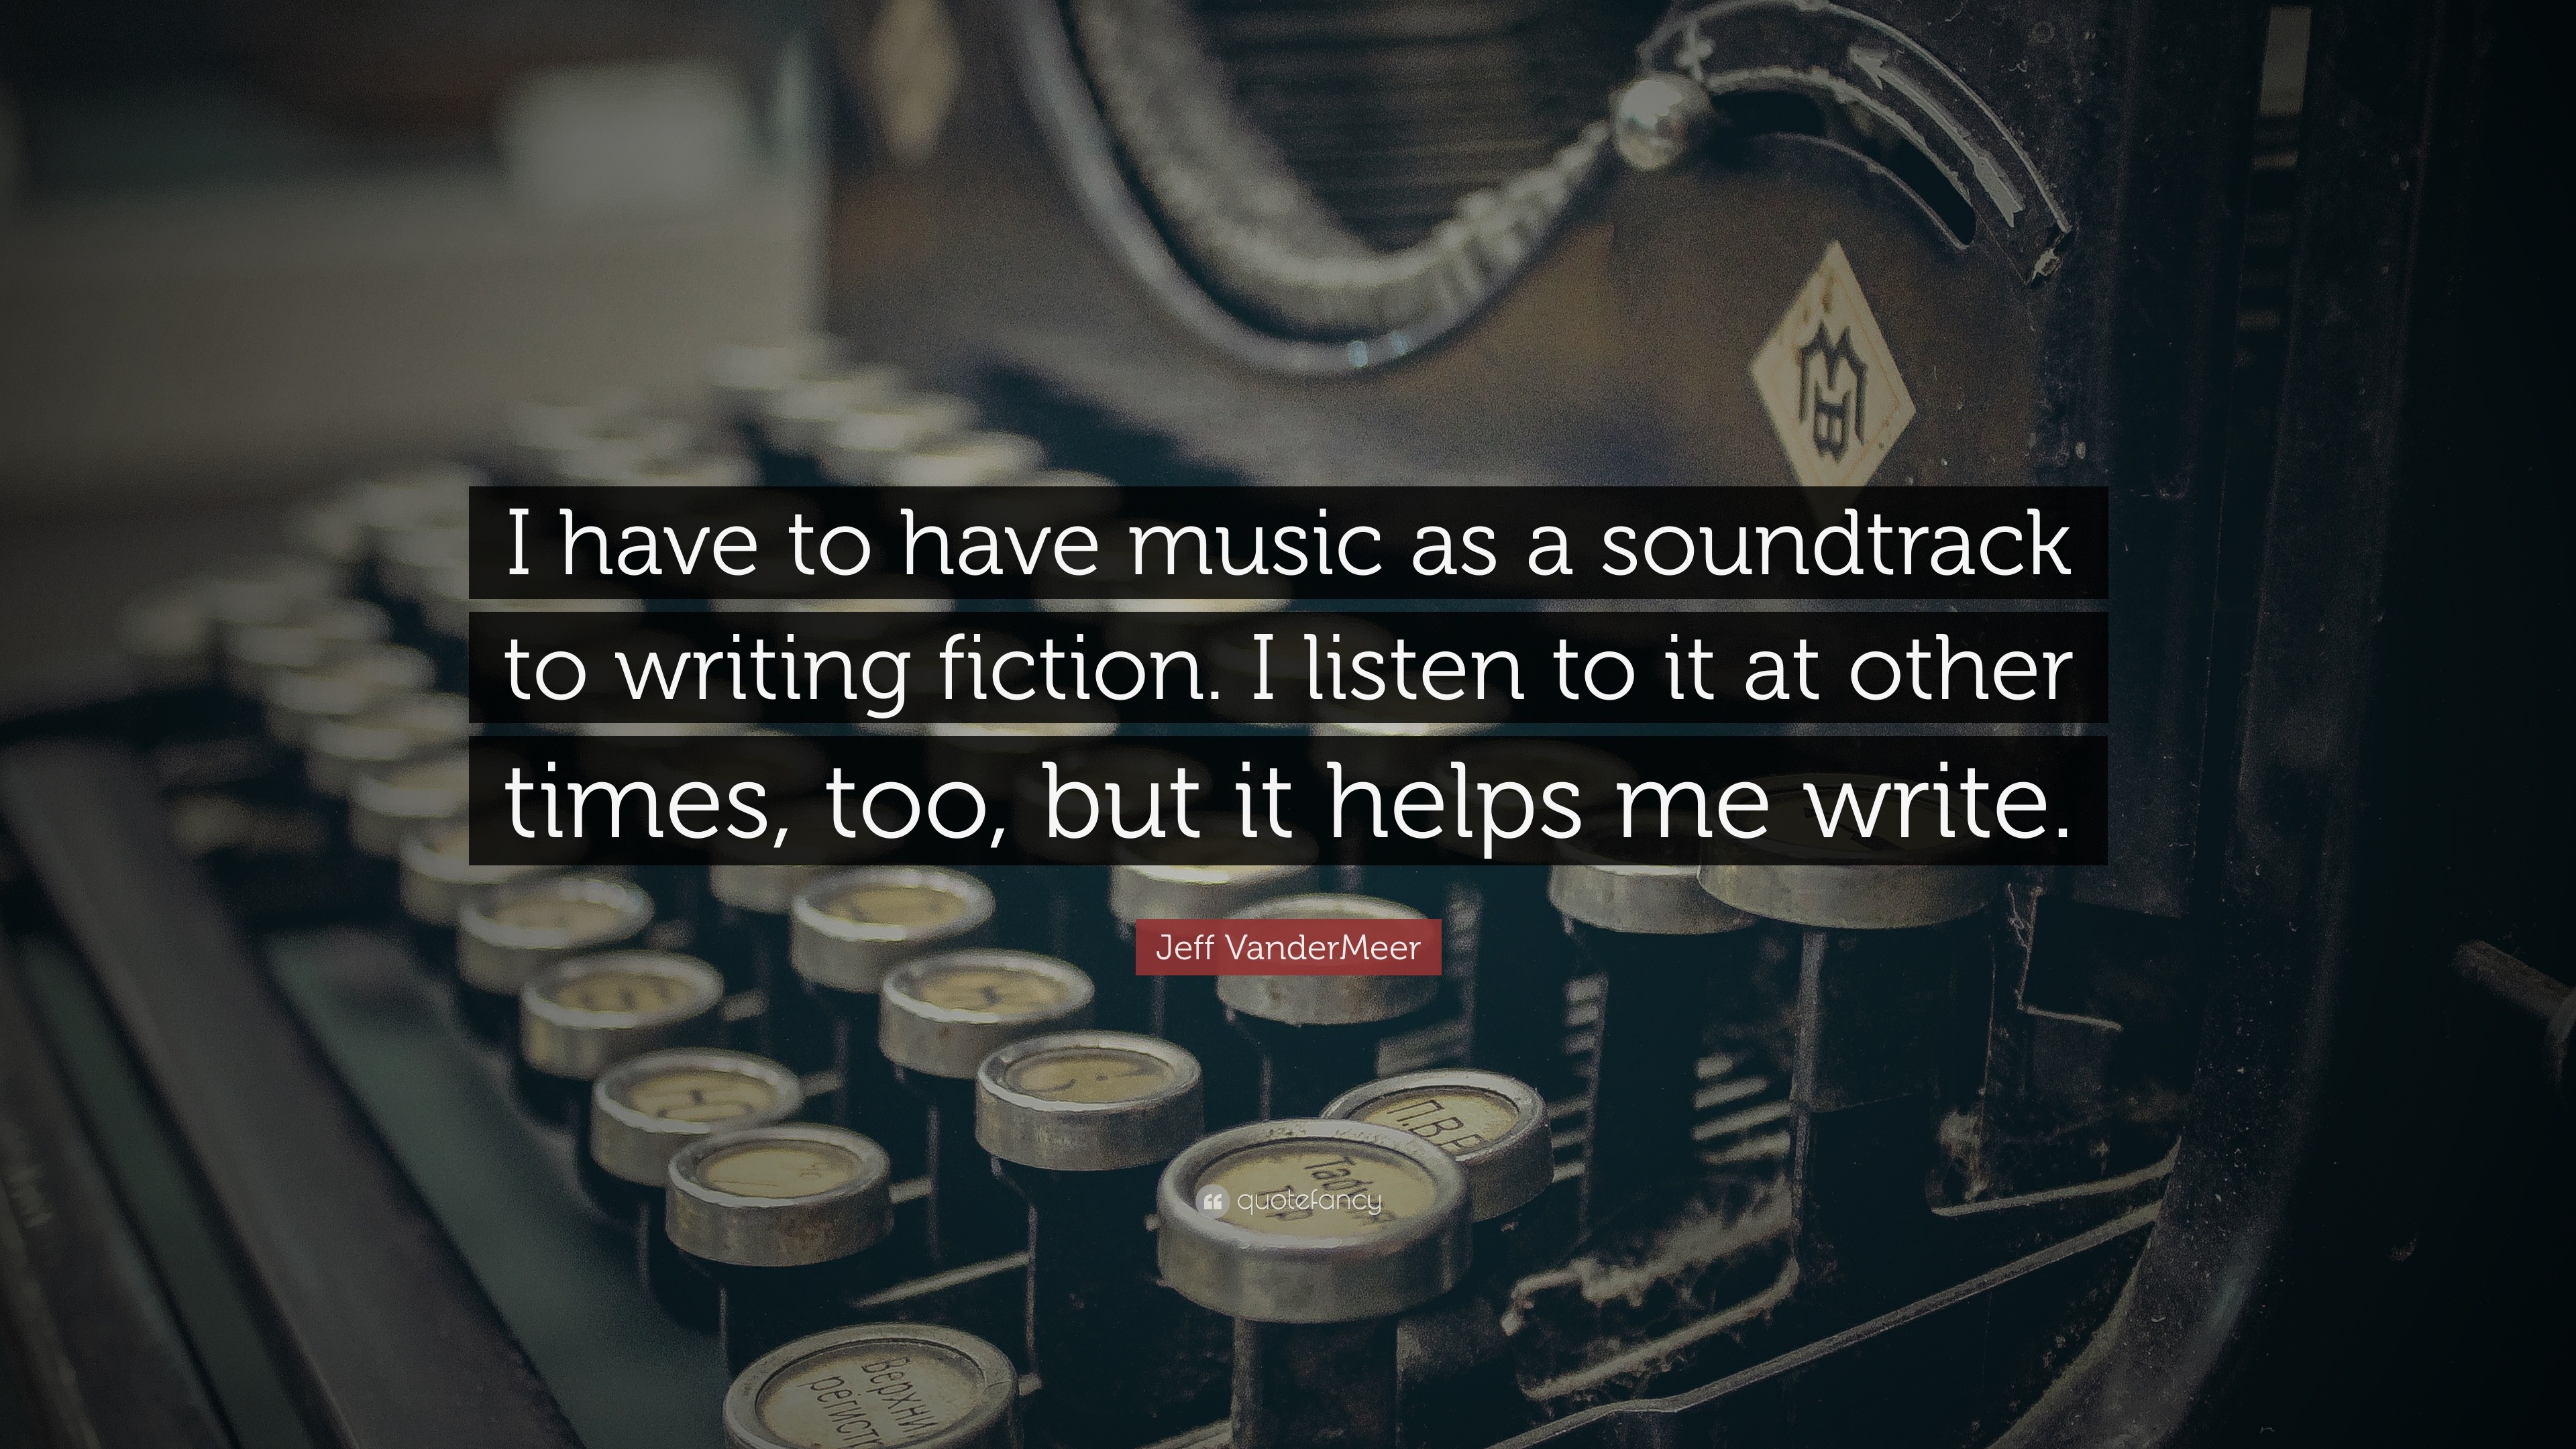 Jeff VanderMeer Quote: “I have to have music as a soundtrack to